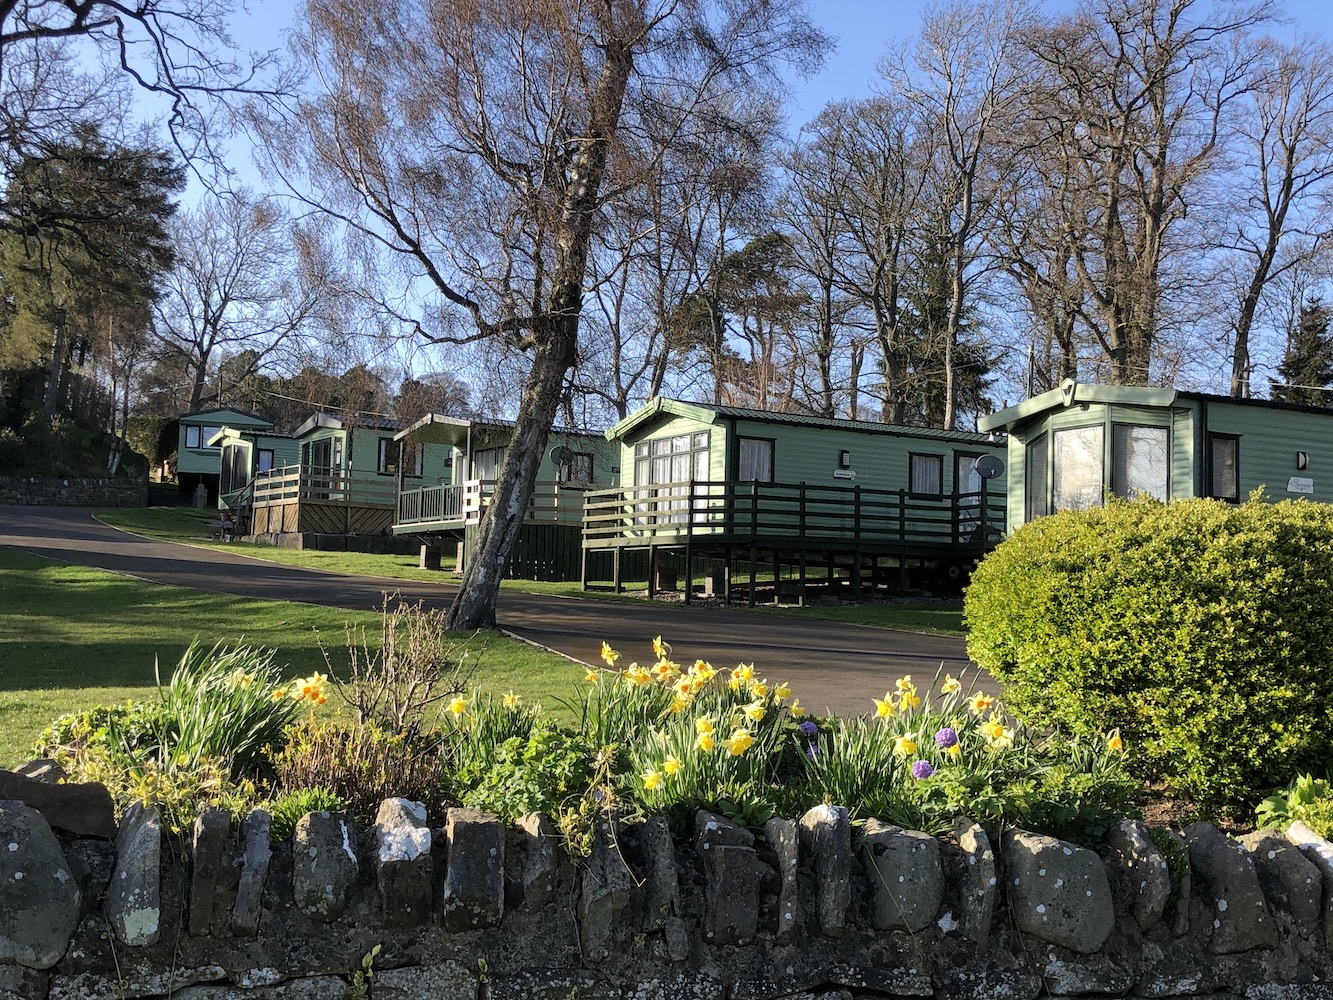 The benefits of owning a static caravan in the countryside